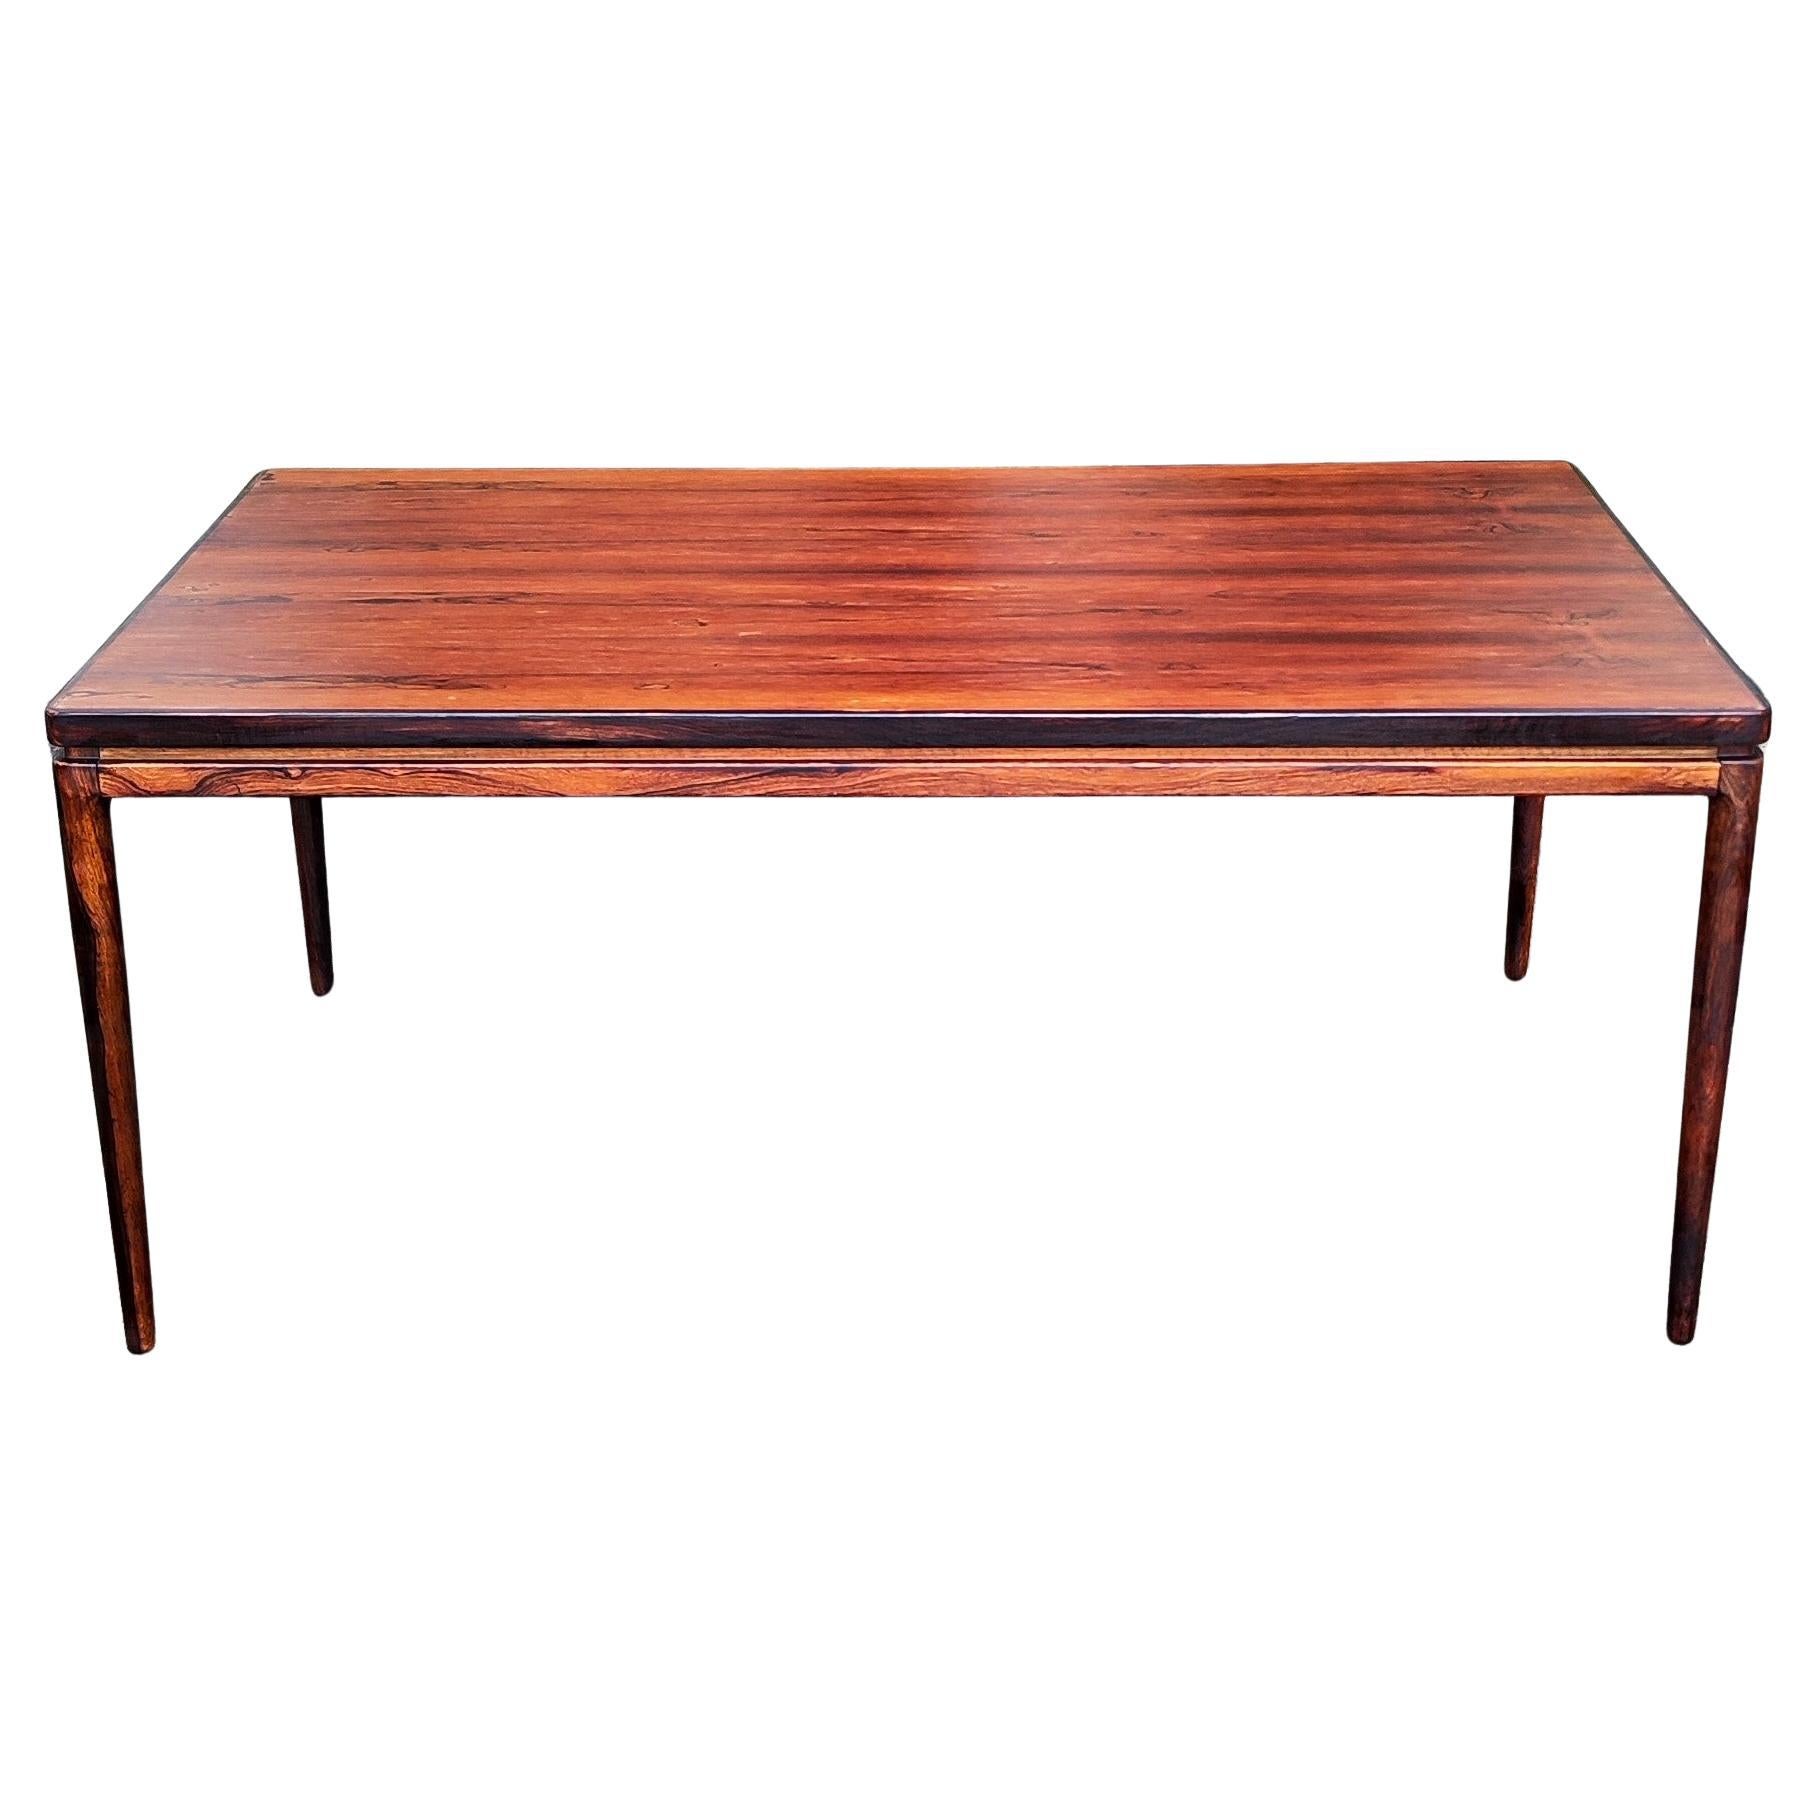 Wood dining table from the 60s - Johannes Andersen - Danish design For Sale